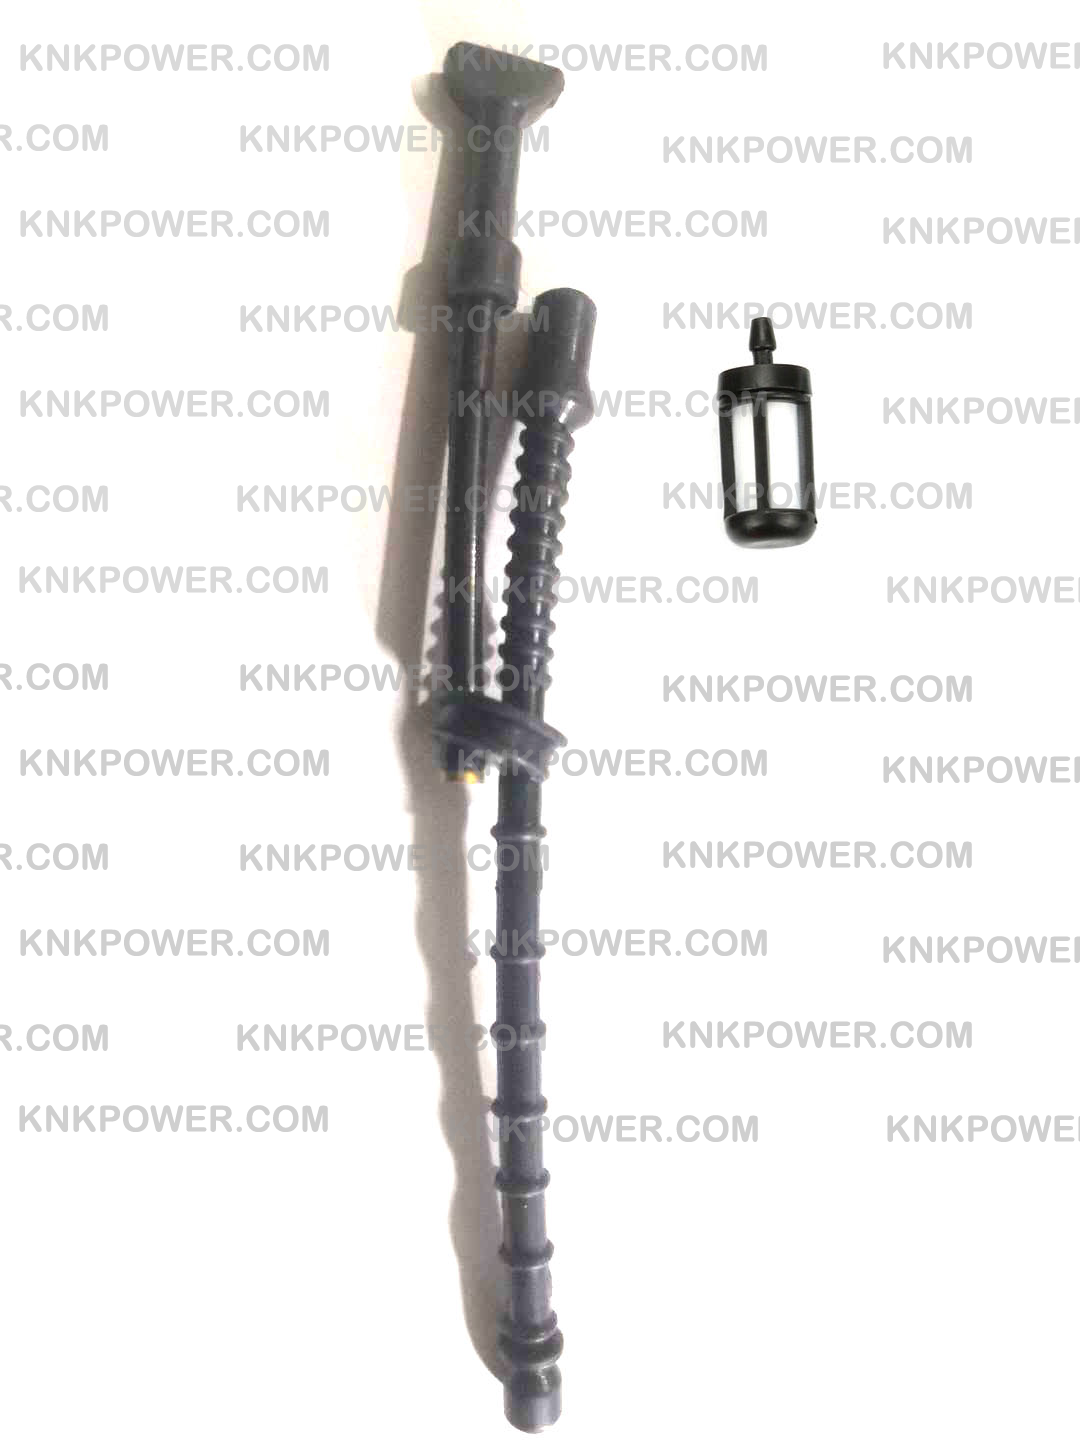 knkpower [7425] STIHL MS200 MS200T CHAIN SAW 1129 350 3600